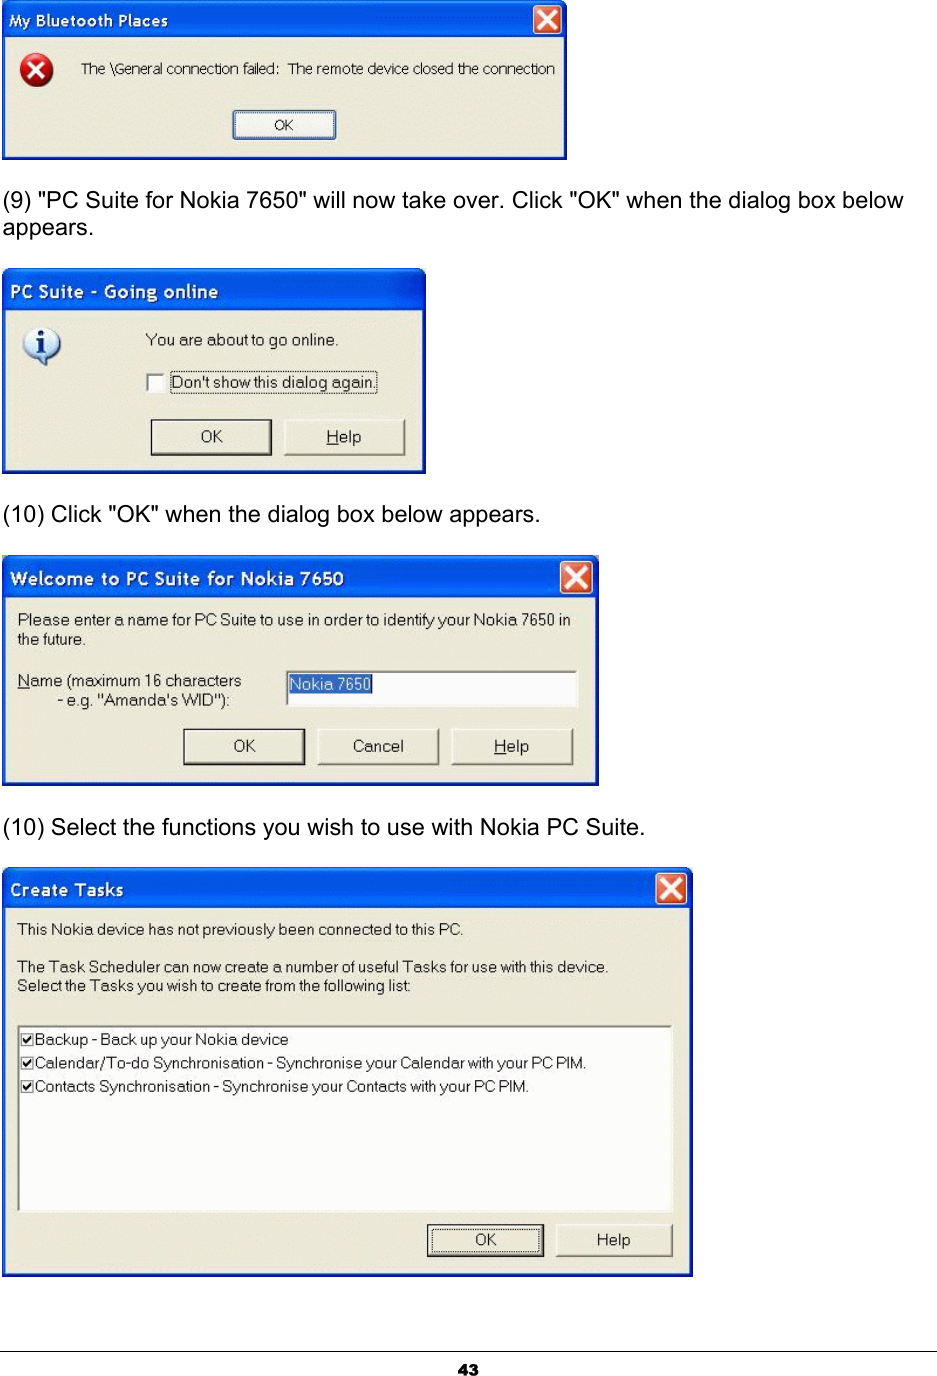  43 (9) &quot;PC Suite for Nokia 7650&quot; will now take over. Click &quot;OK&quot; when the dialog box below appears.  (10) Click &quot;OK&quot; when the dialog box below appears.  (10) Select the functions you wish to use with Nokia PC Suite.  